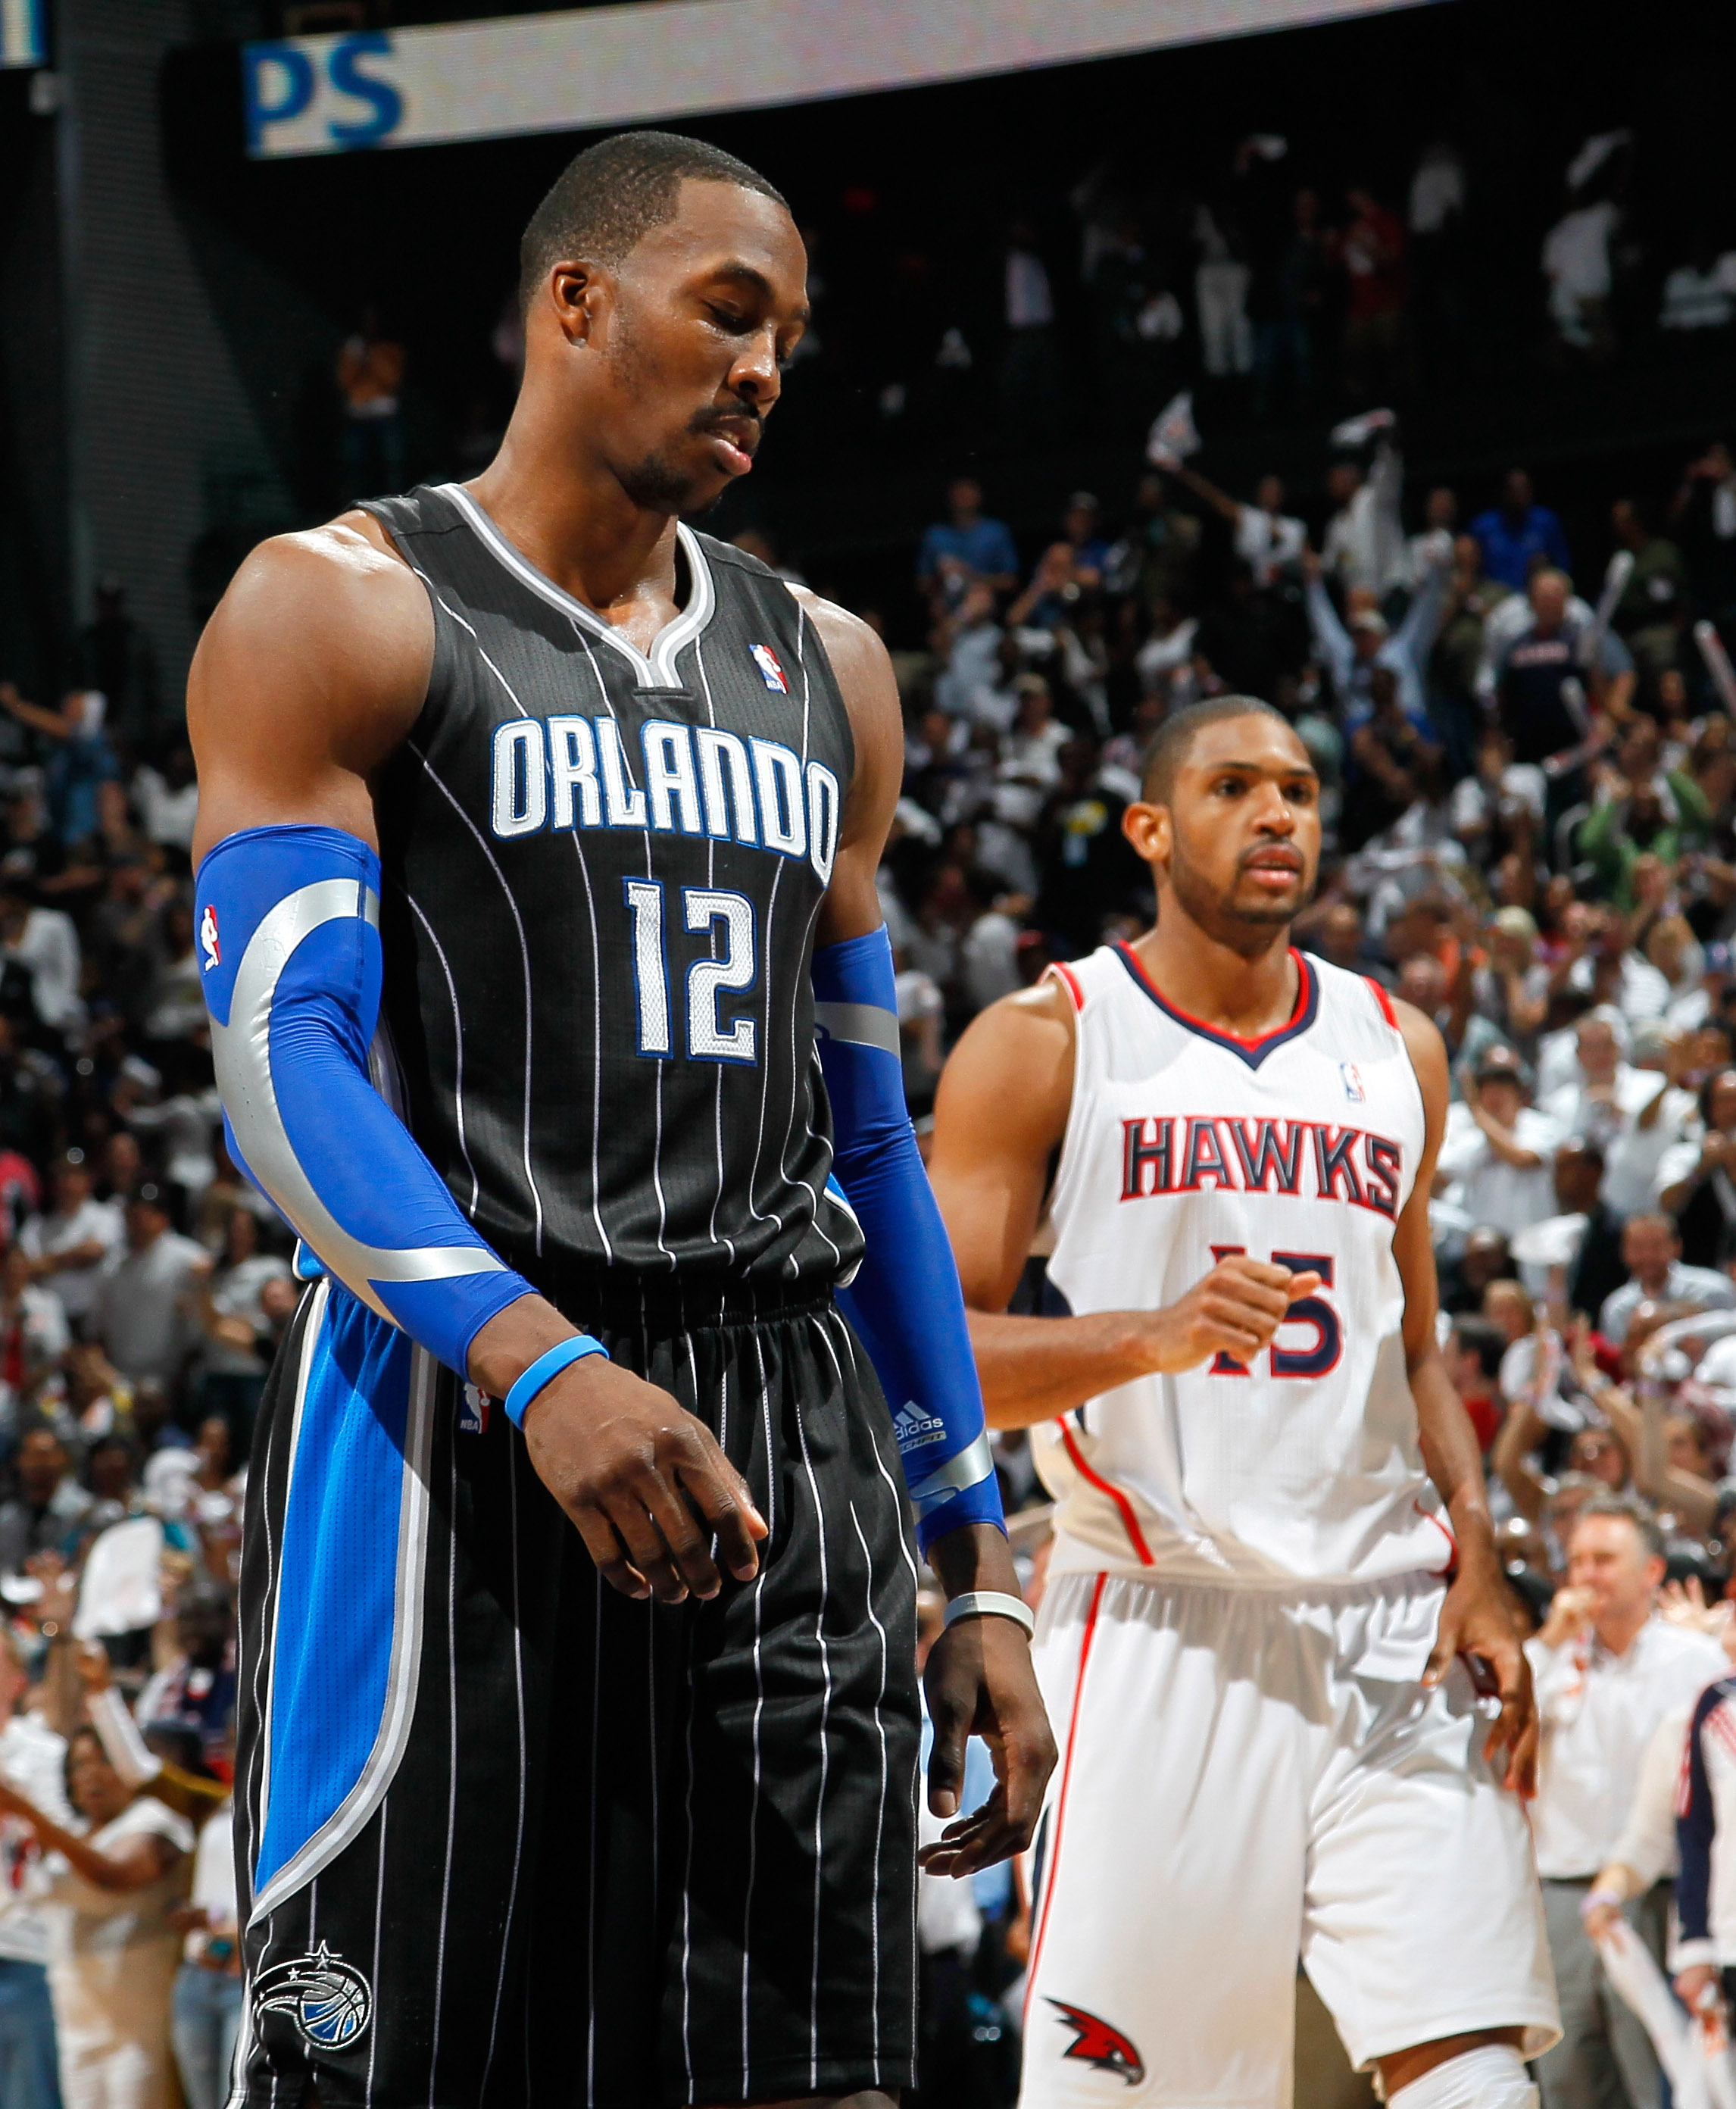 All-Star Weekend focus is on Dwight Howard, Magic